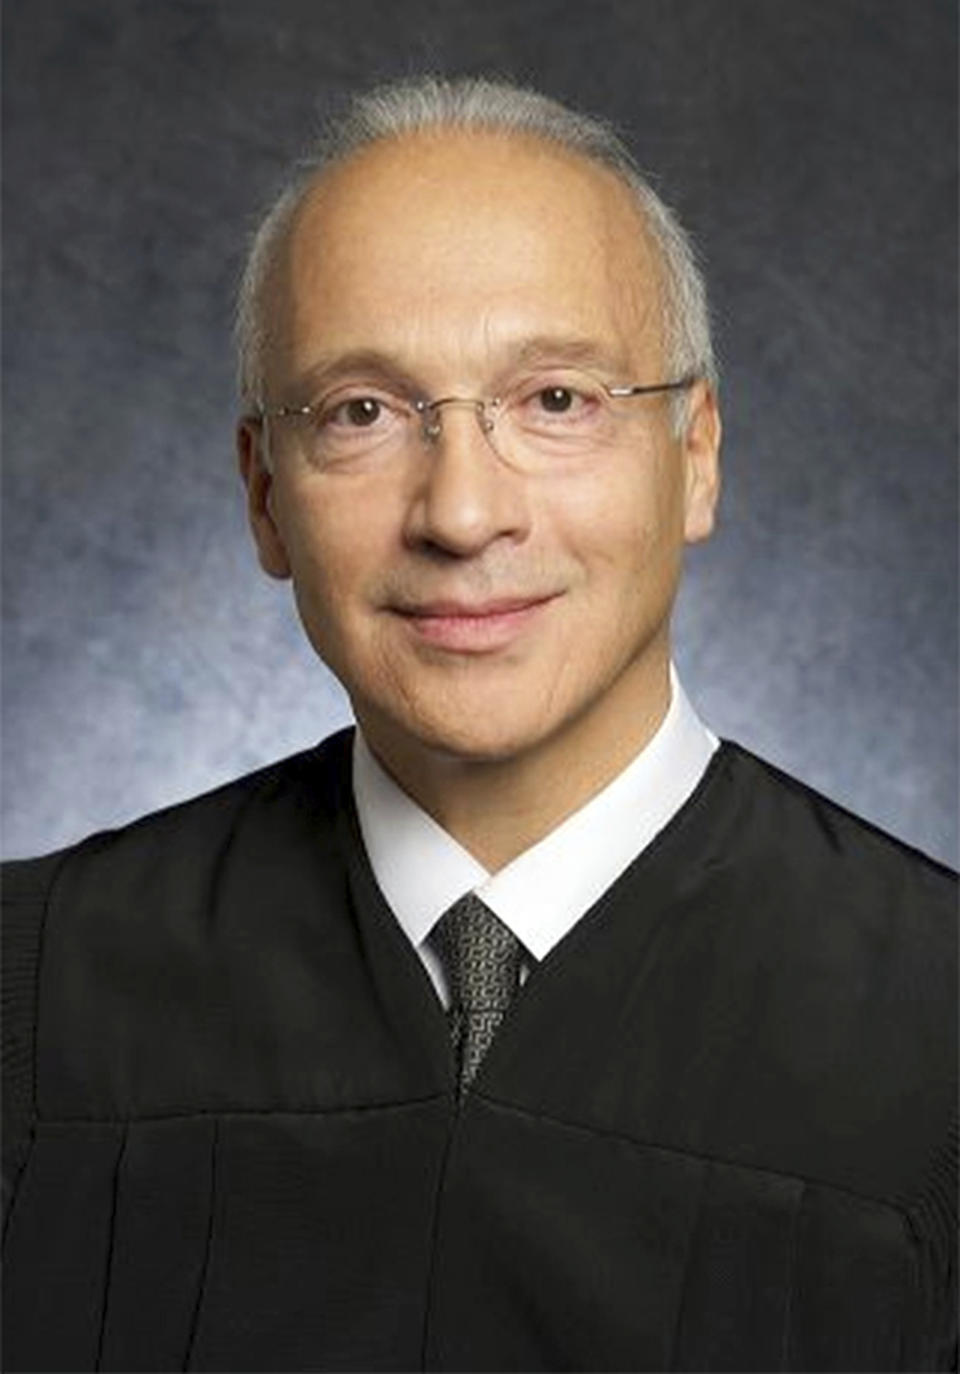 FILE - This undated photo provided by the U.S. District Court shows Judge Gonzalo Curiel. A federal appeals court will hear arguments Tuesday, Aug. 7, 2018, by the state of California and advocacy groups who contend the Trump administration overreached by waiving environmental reviews to speed construction of the president’s prized border wall with Mexico. California is appealing a decision by U.S. District Judge Curiel of San Diego, who sided with the administration in Feb. 2018. (U.S. District Court via AP, File)